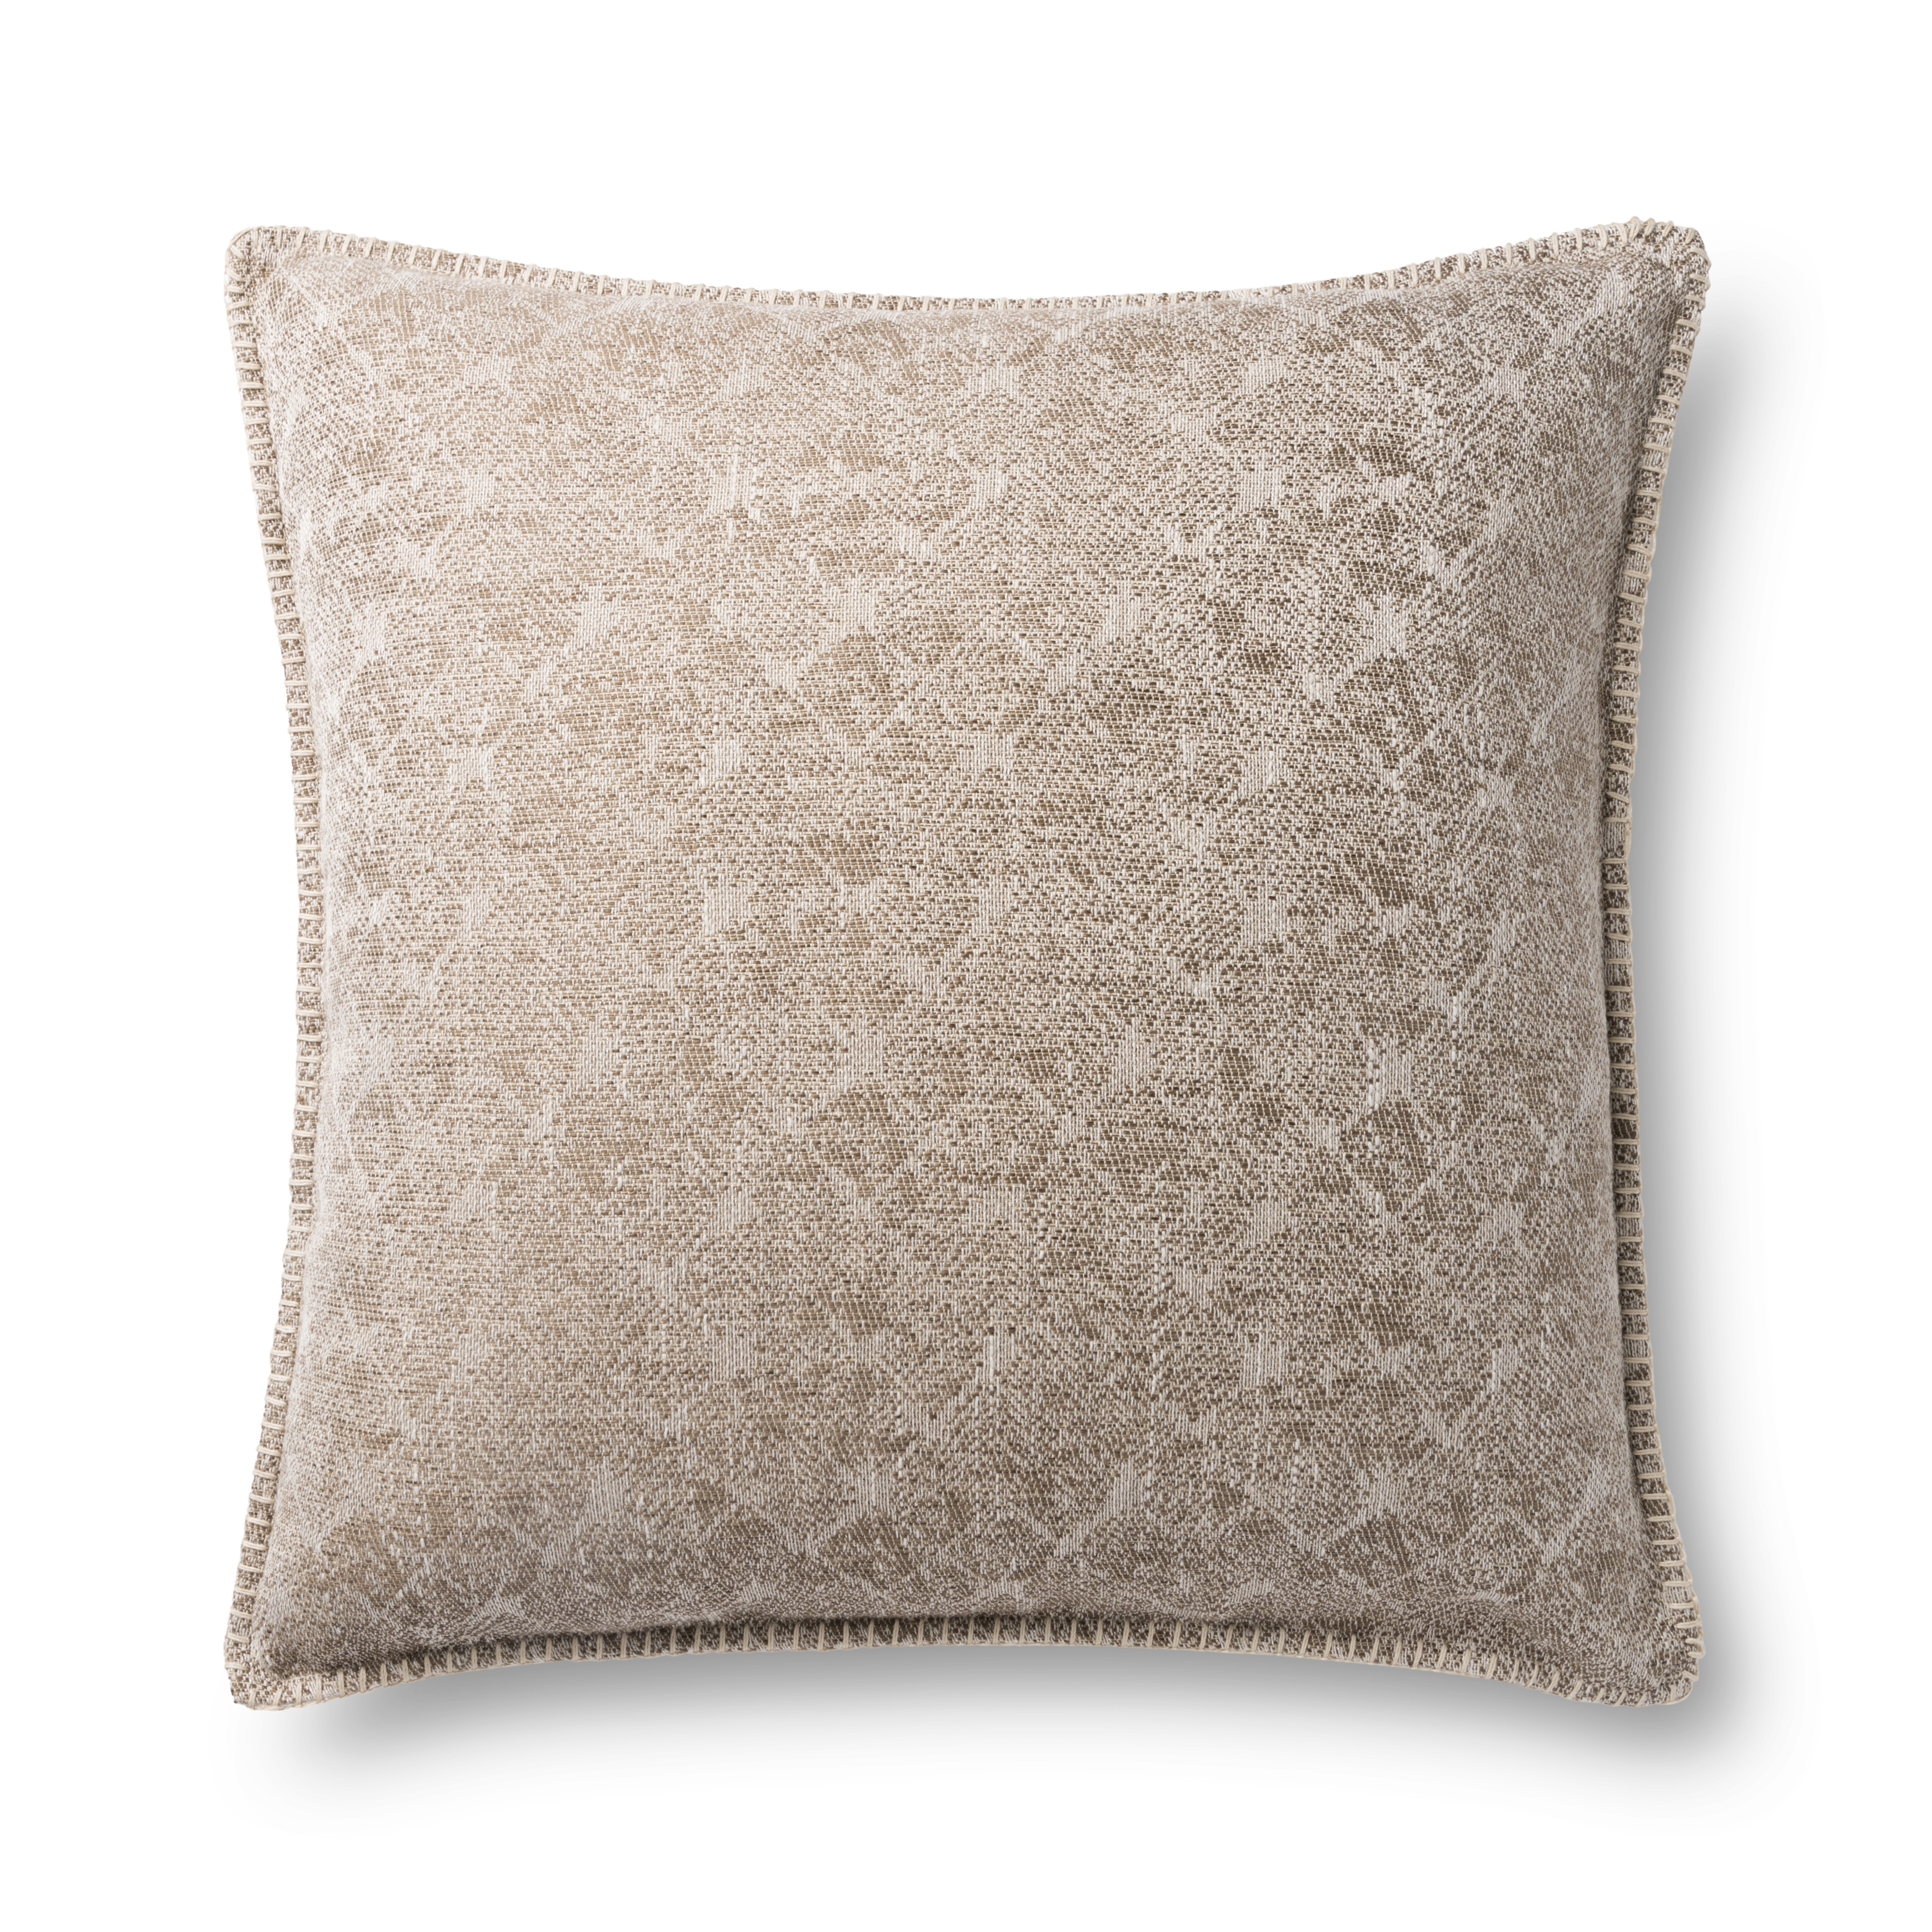 Jacquard Abstract Pillow with Poly Fill, Beige, 22" x 22" - Loloi Rugs